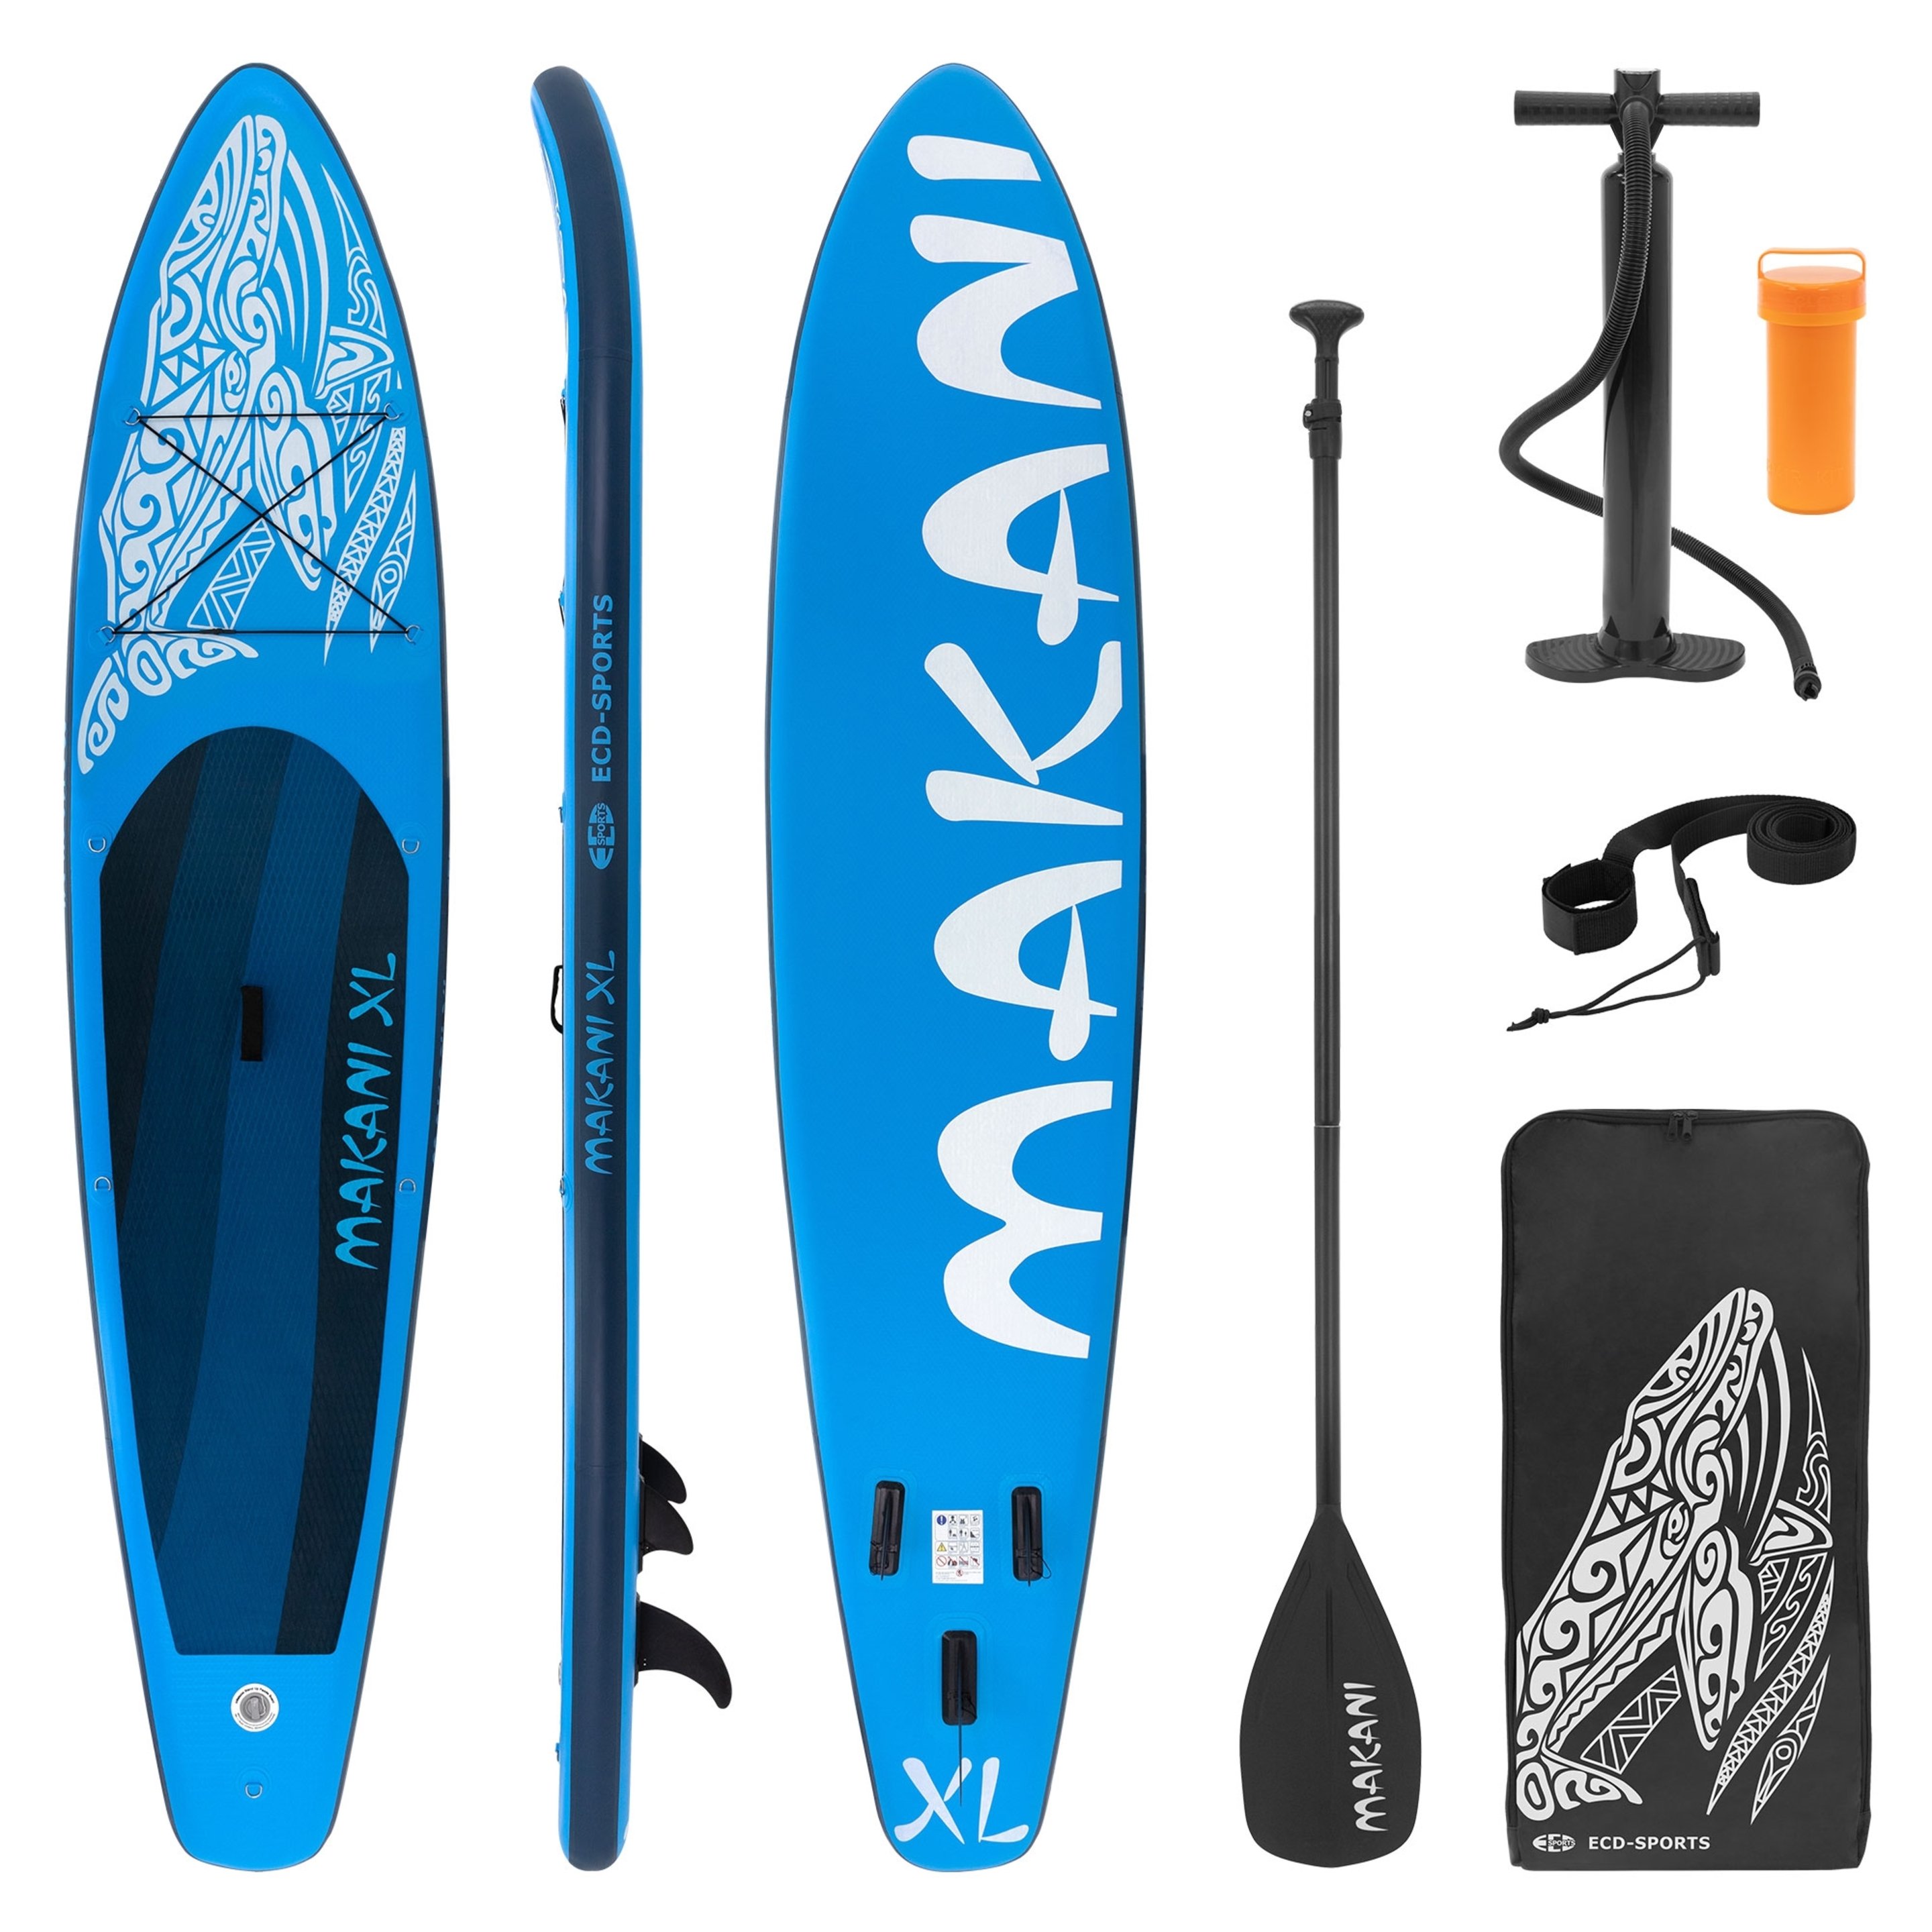 Tabla De Stand Up Paddle Inflable Makani Xl 380x80x15 Cm